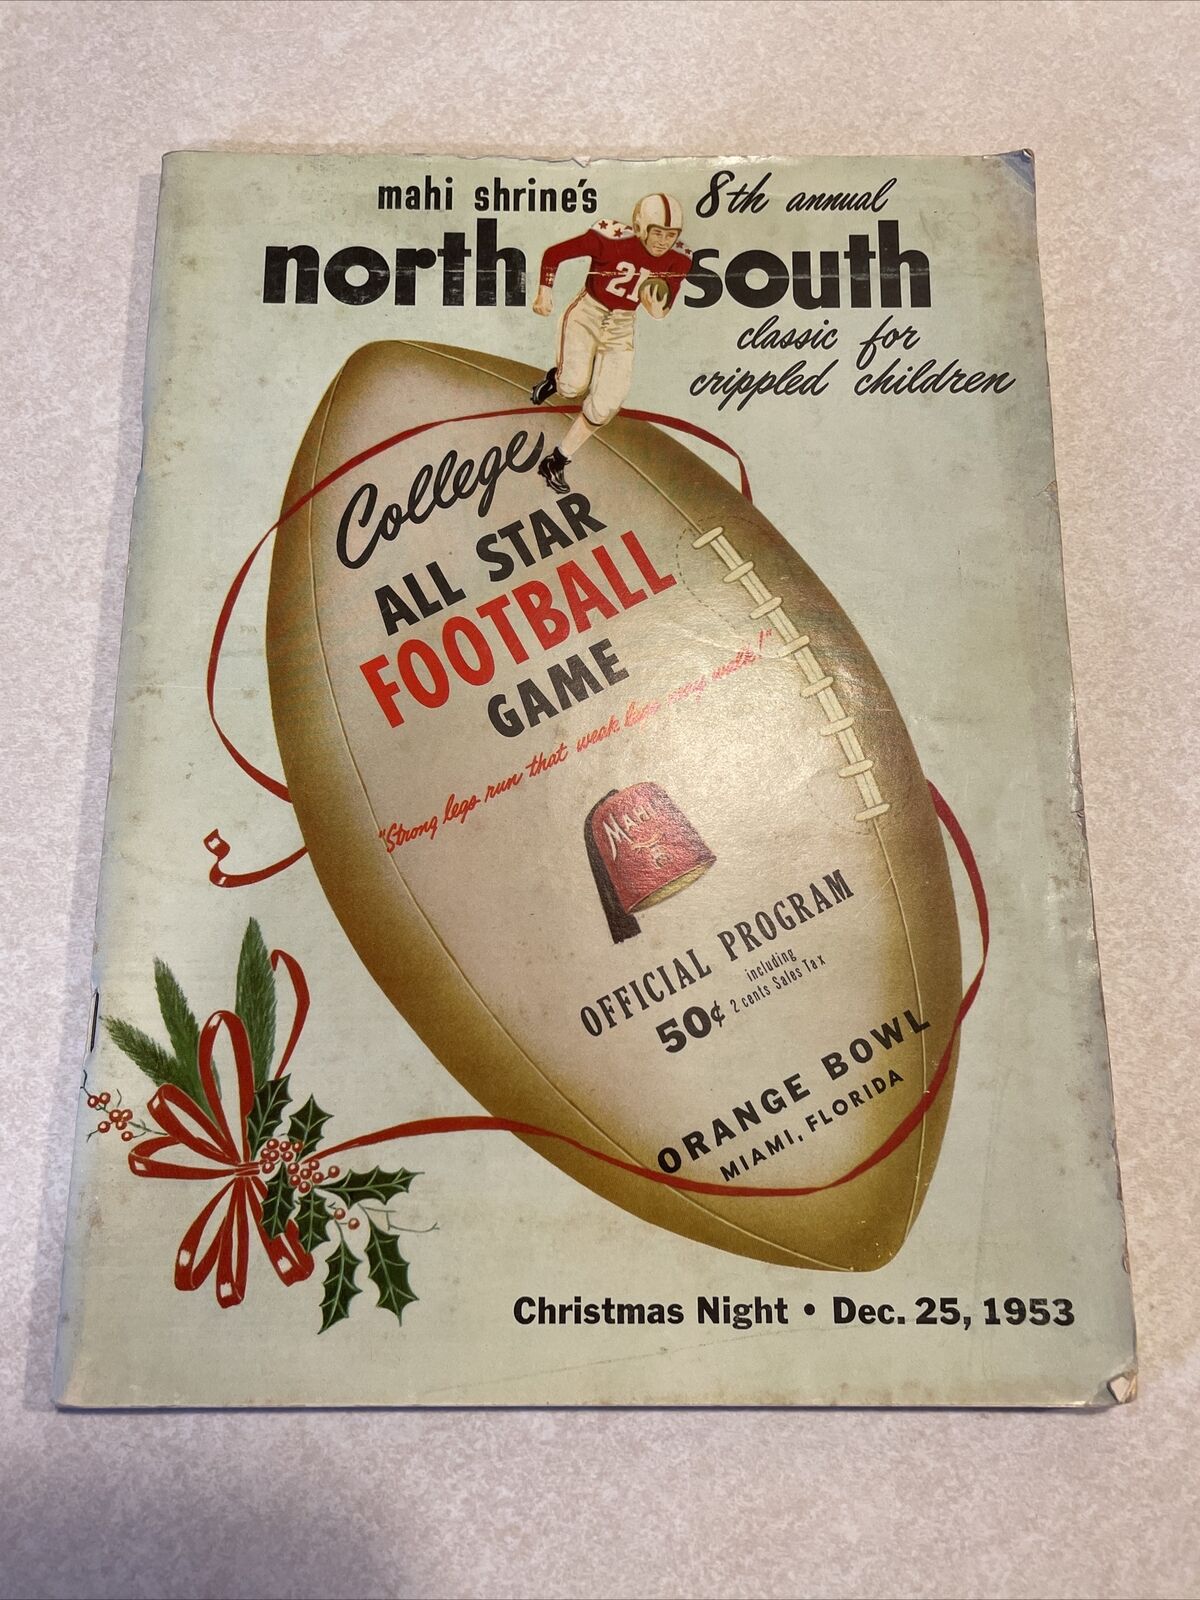 1953 North Vs South College All-star Game Vintage Football Program